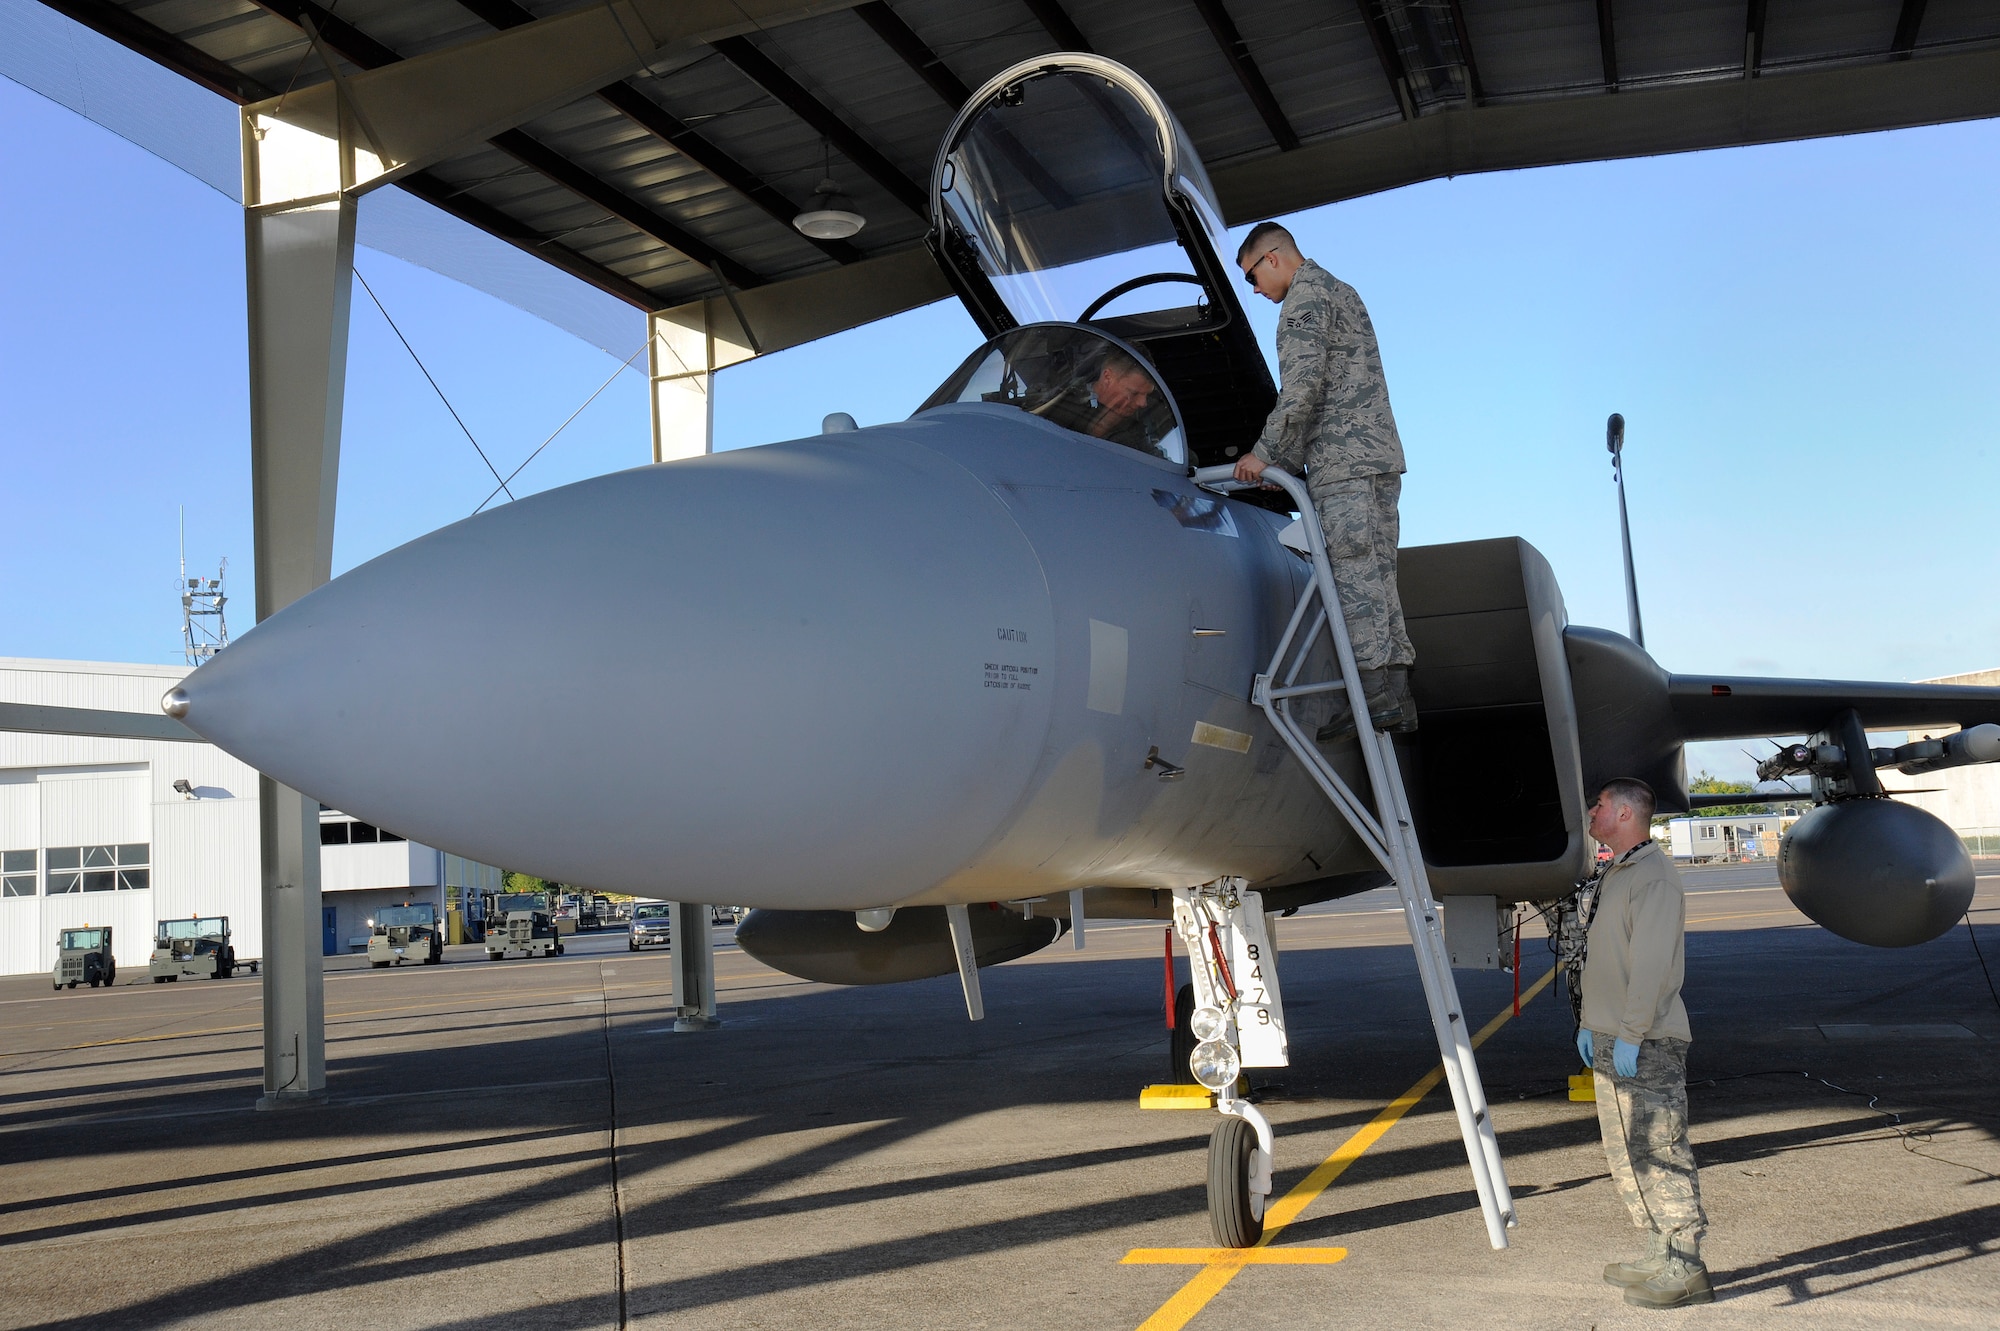 Lt. Col. Todd Hofford, pilot with the 123rd Fighter Squadron begins to prepare for a morning flight as Senior Airman Adam Burger (ladder) and Master Sgt. Dustin Brice, assigned to the 142nd Fighter Wing Aircraft Maintenance Group, begin pre-flight maintenance operations, Sept. 4, Portland Air National Guard Base, Ore.  (U.S. Air National Guard photo by Tech. Sgt. John Hughel, 142nd Fighter Wing Public Affairs/Released)